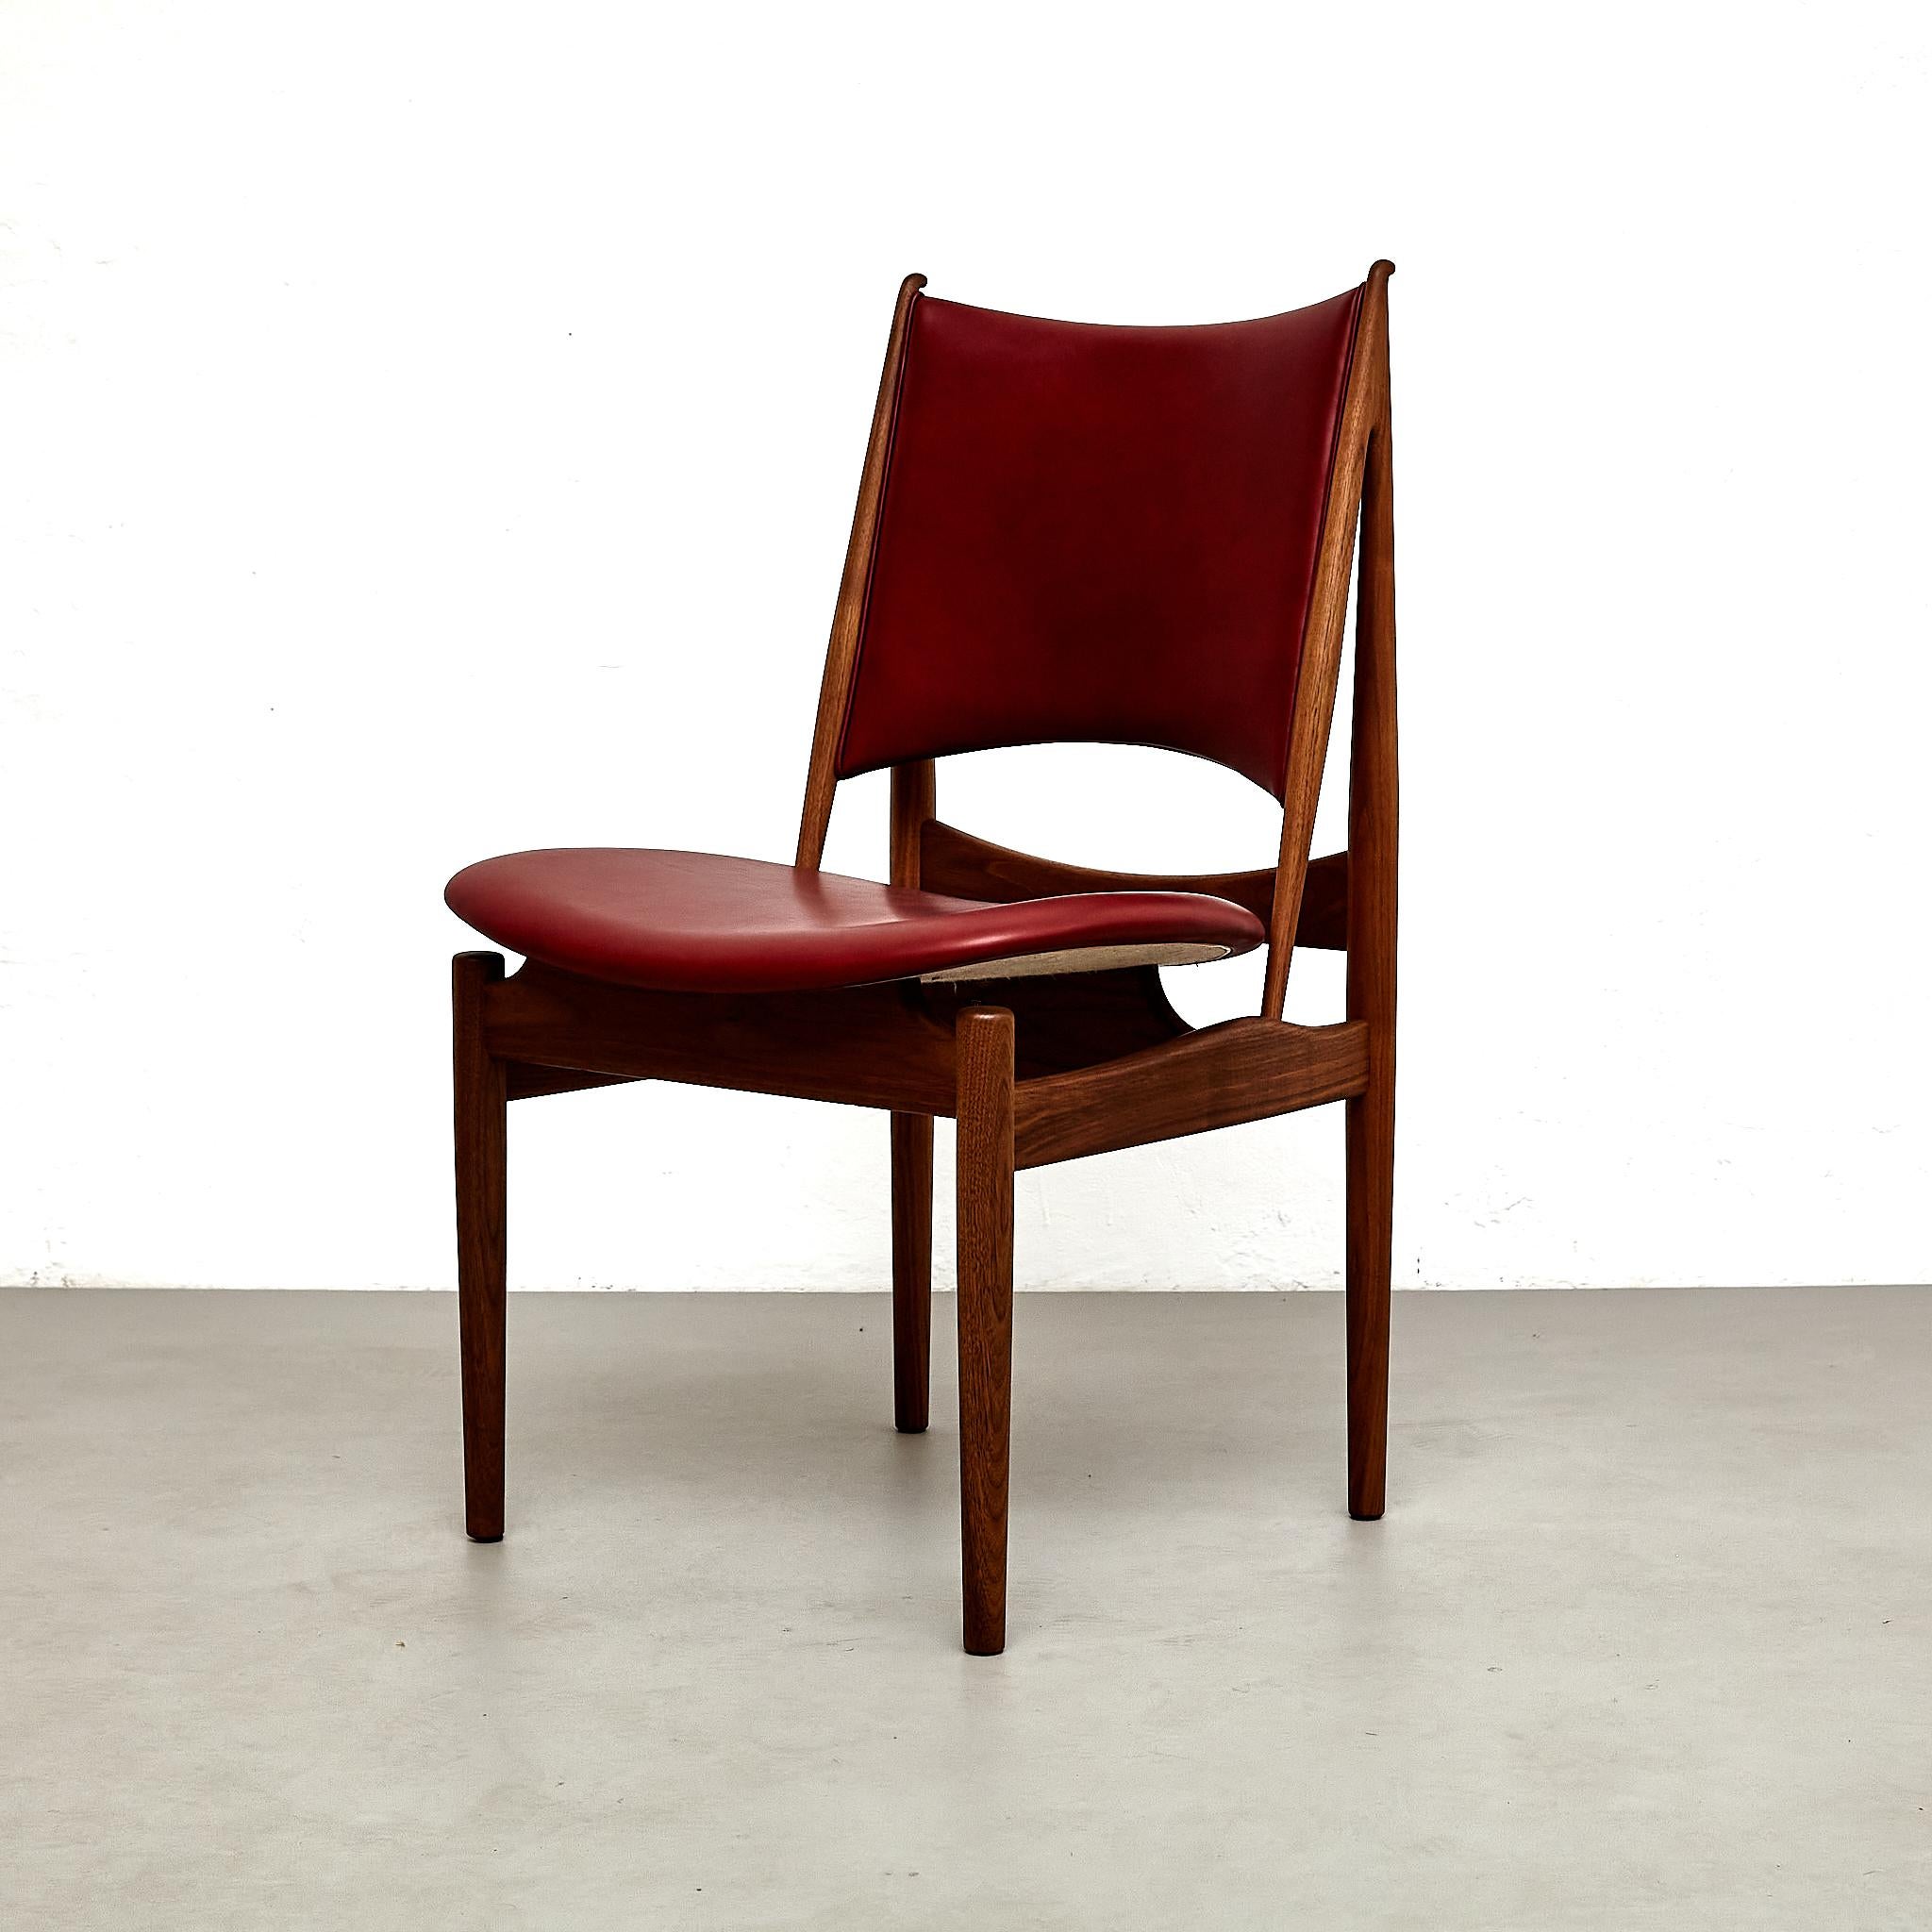 Danish Finn Juhl Egyptian Chair in Walnut Wood and Dark Red Leather For Sale